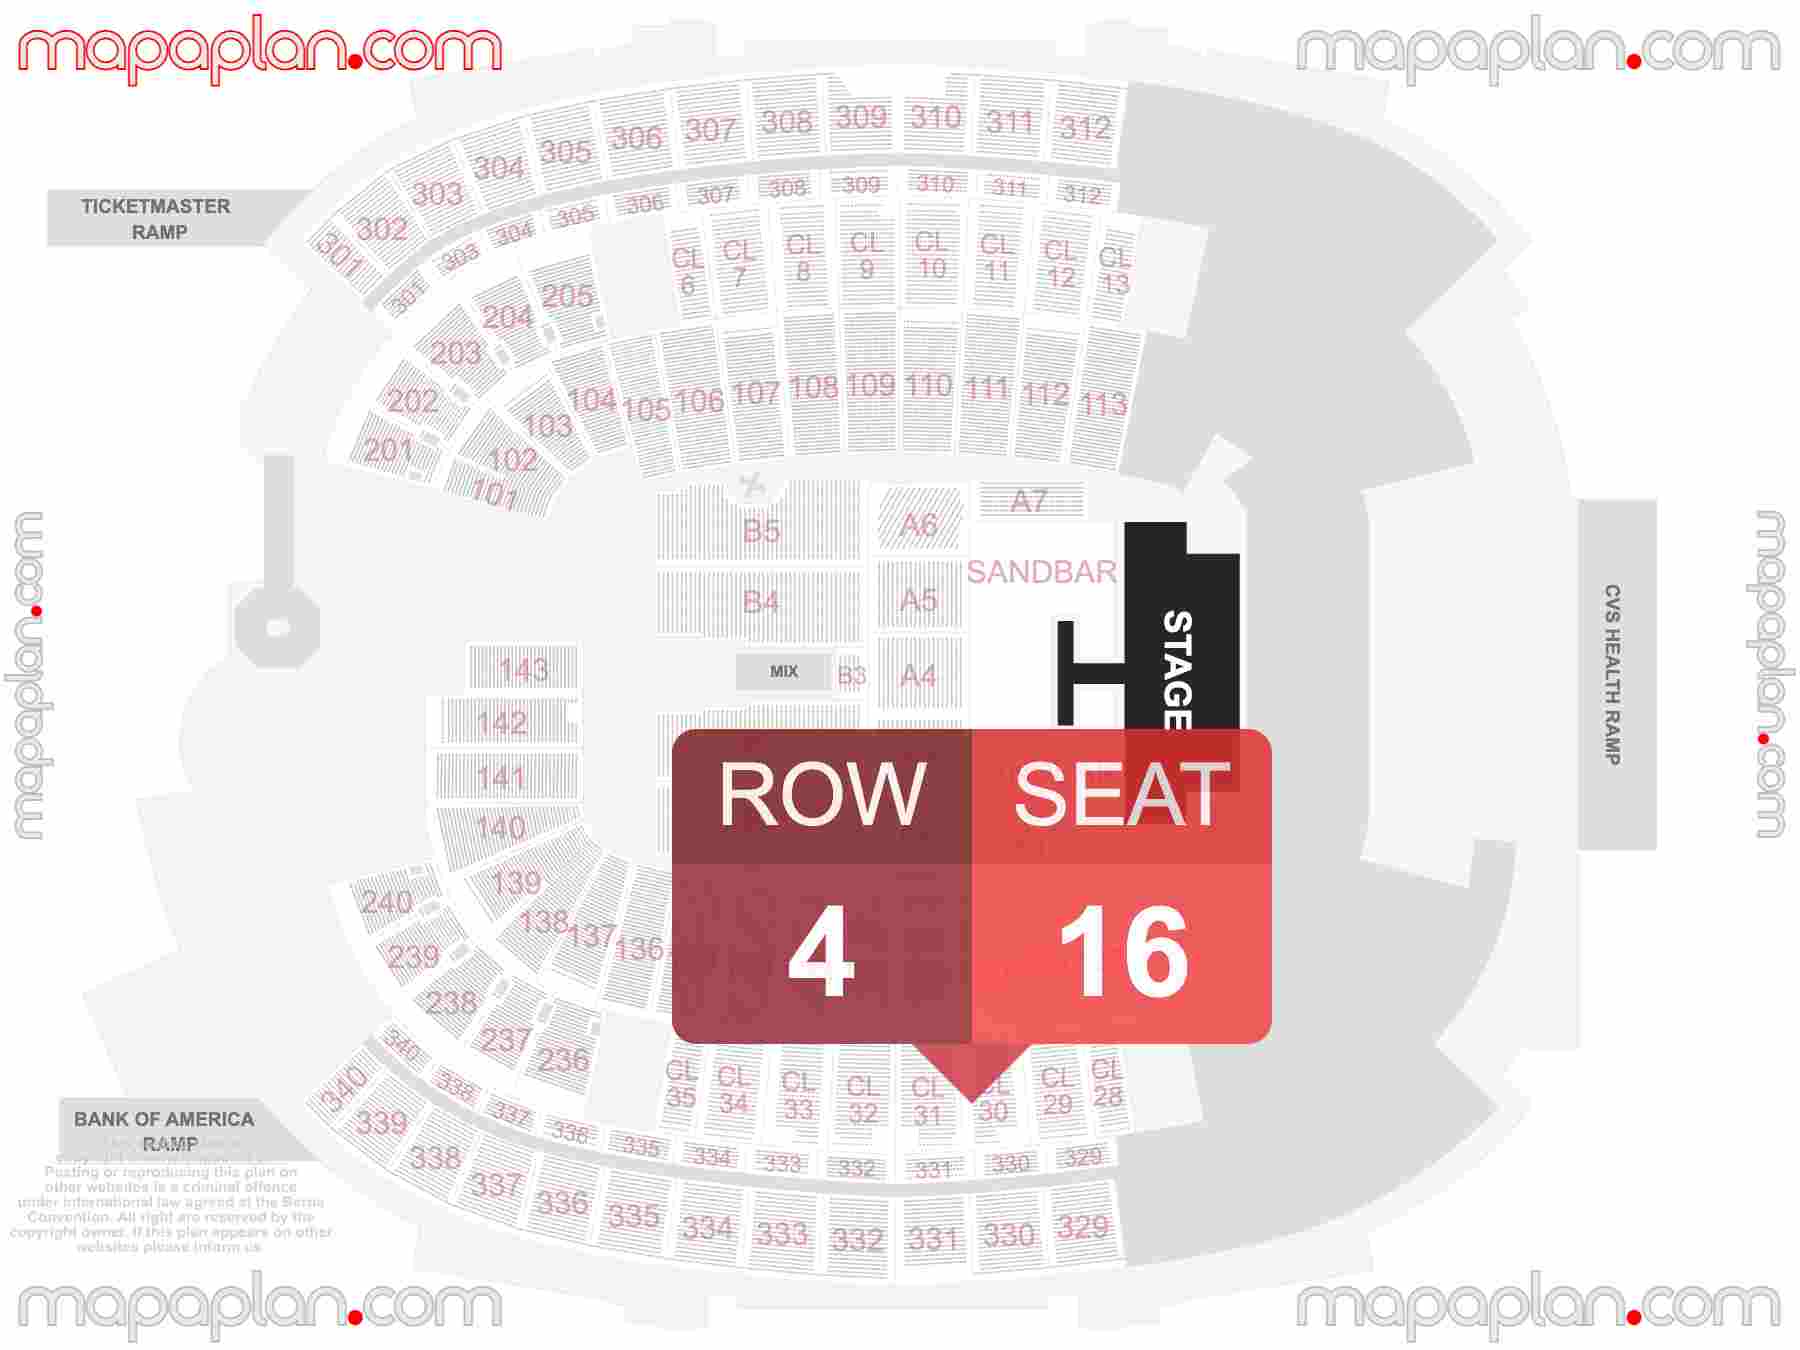 Foxborough Gillette Stadium seating chart Concert with extended catwalk runway B-stage and PIT floor standing room only detailed seating chart - 3d virtual seat numbers and row layout